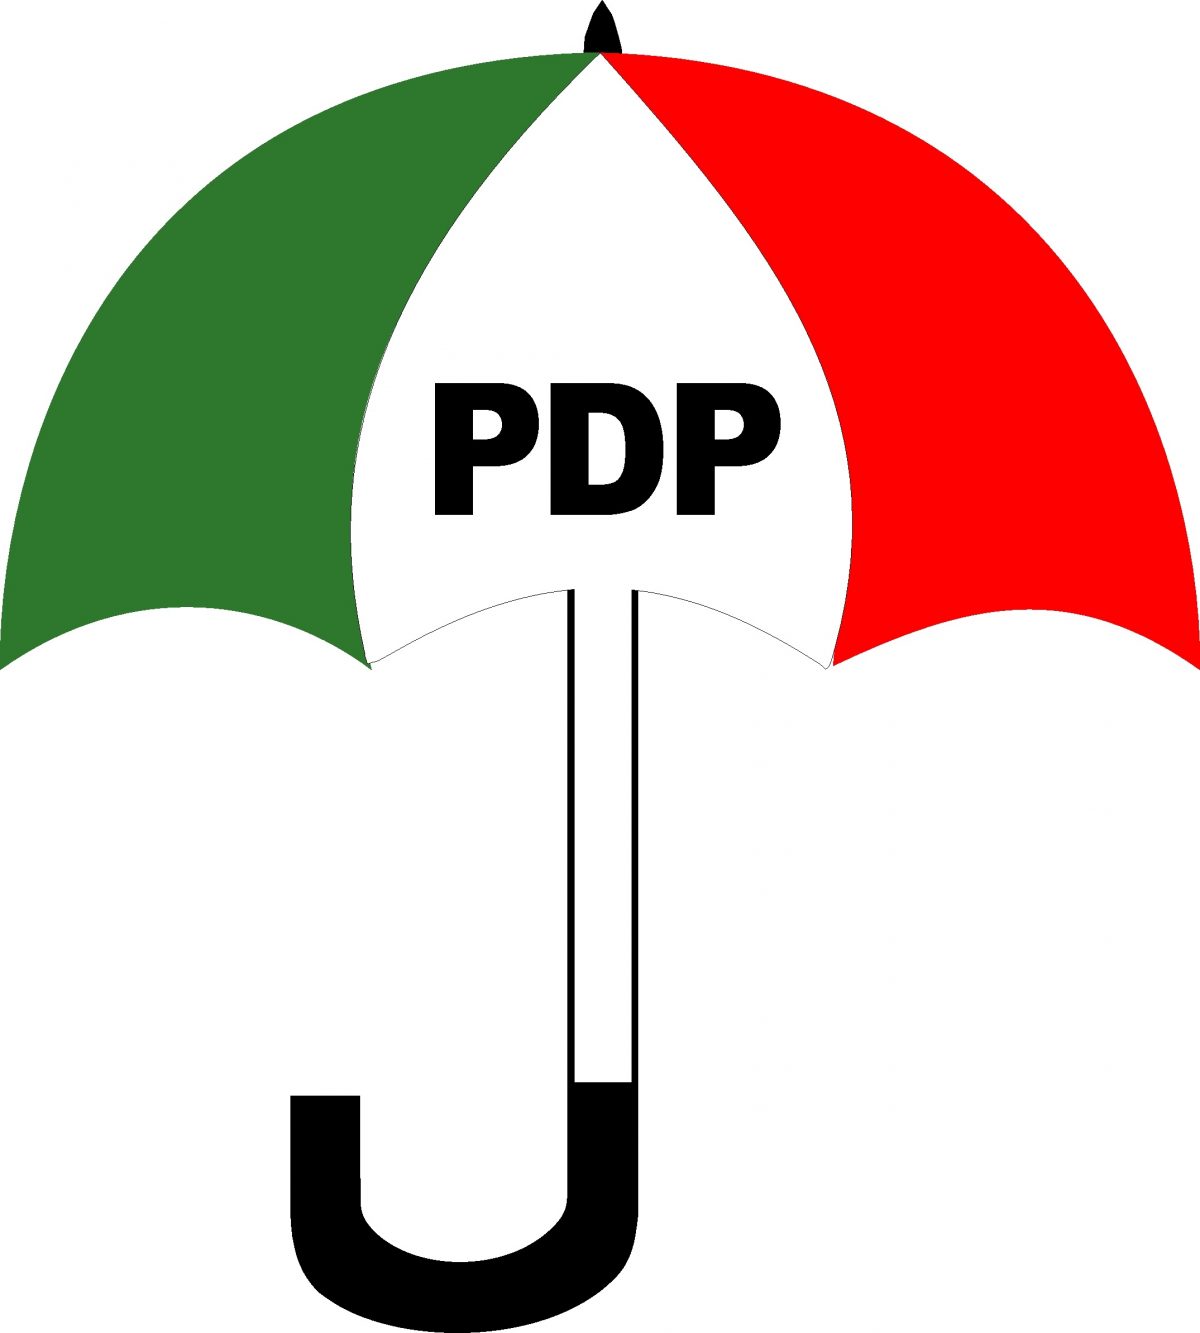 PDP Governors Meet In Abuja, Discuss Economic Hardship, Other Issues